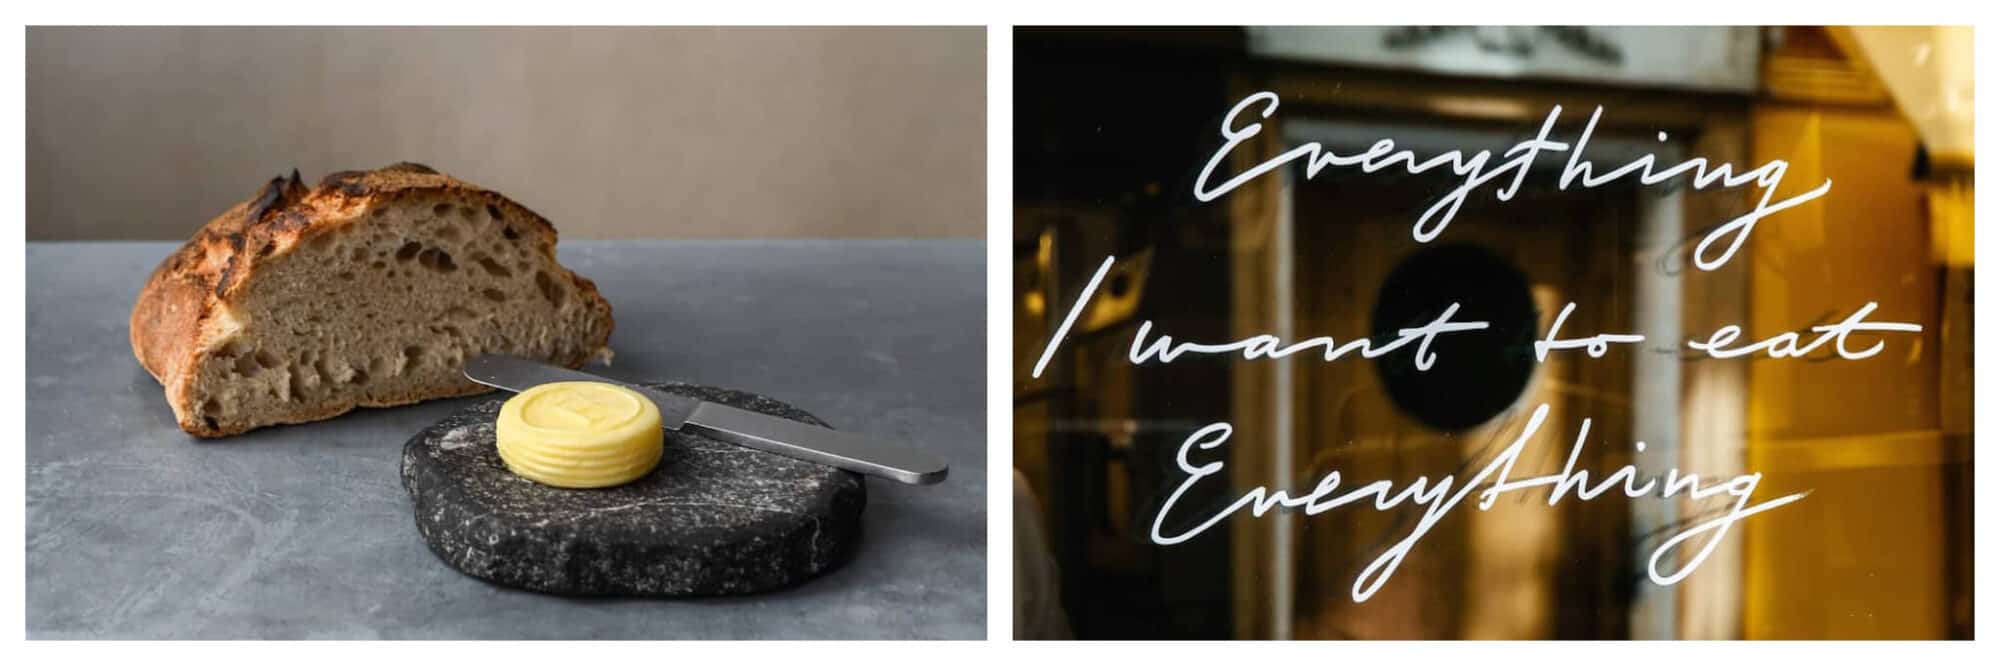 Left: Half a loaf of bread sits next to a disk of fresh butter, Right: The words "Everything, I want to eat everything" is written on the window of Frenchie restaurant in Paris.